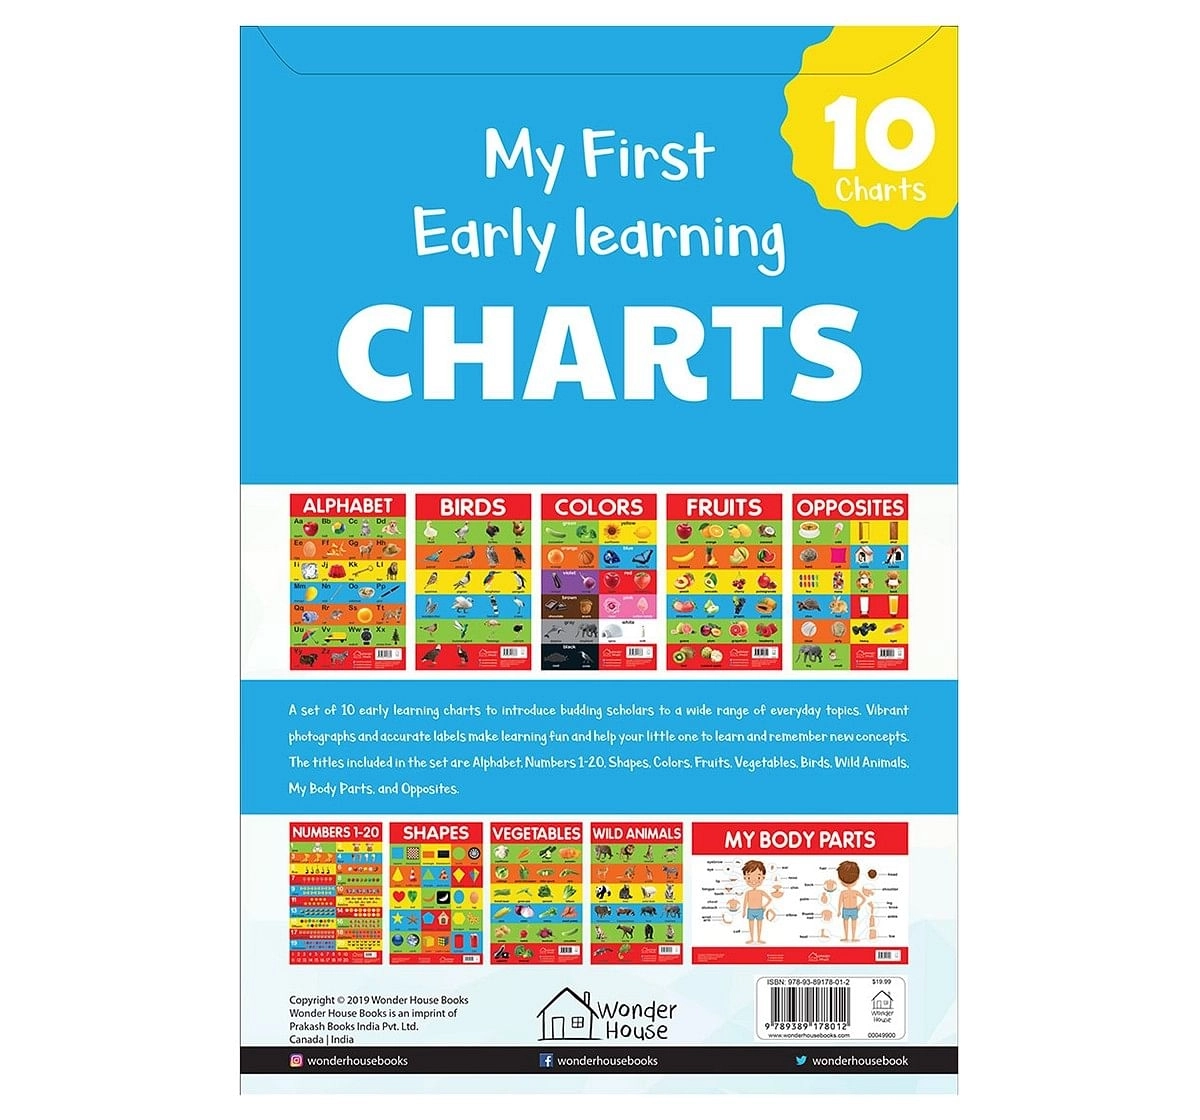 Early Learning Educational Charts For Kids - Pack Of Ten Charts Book, 10 Pages Book By Wonder House Books, Box Set